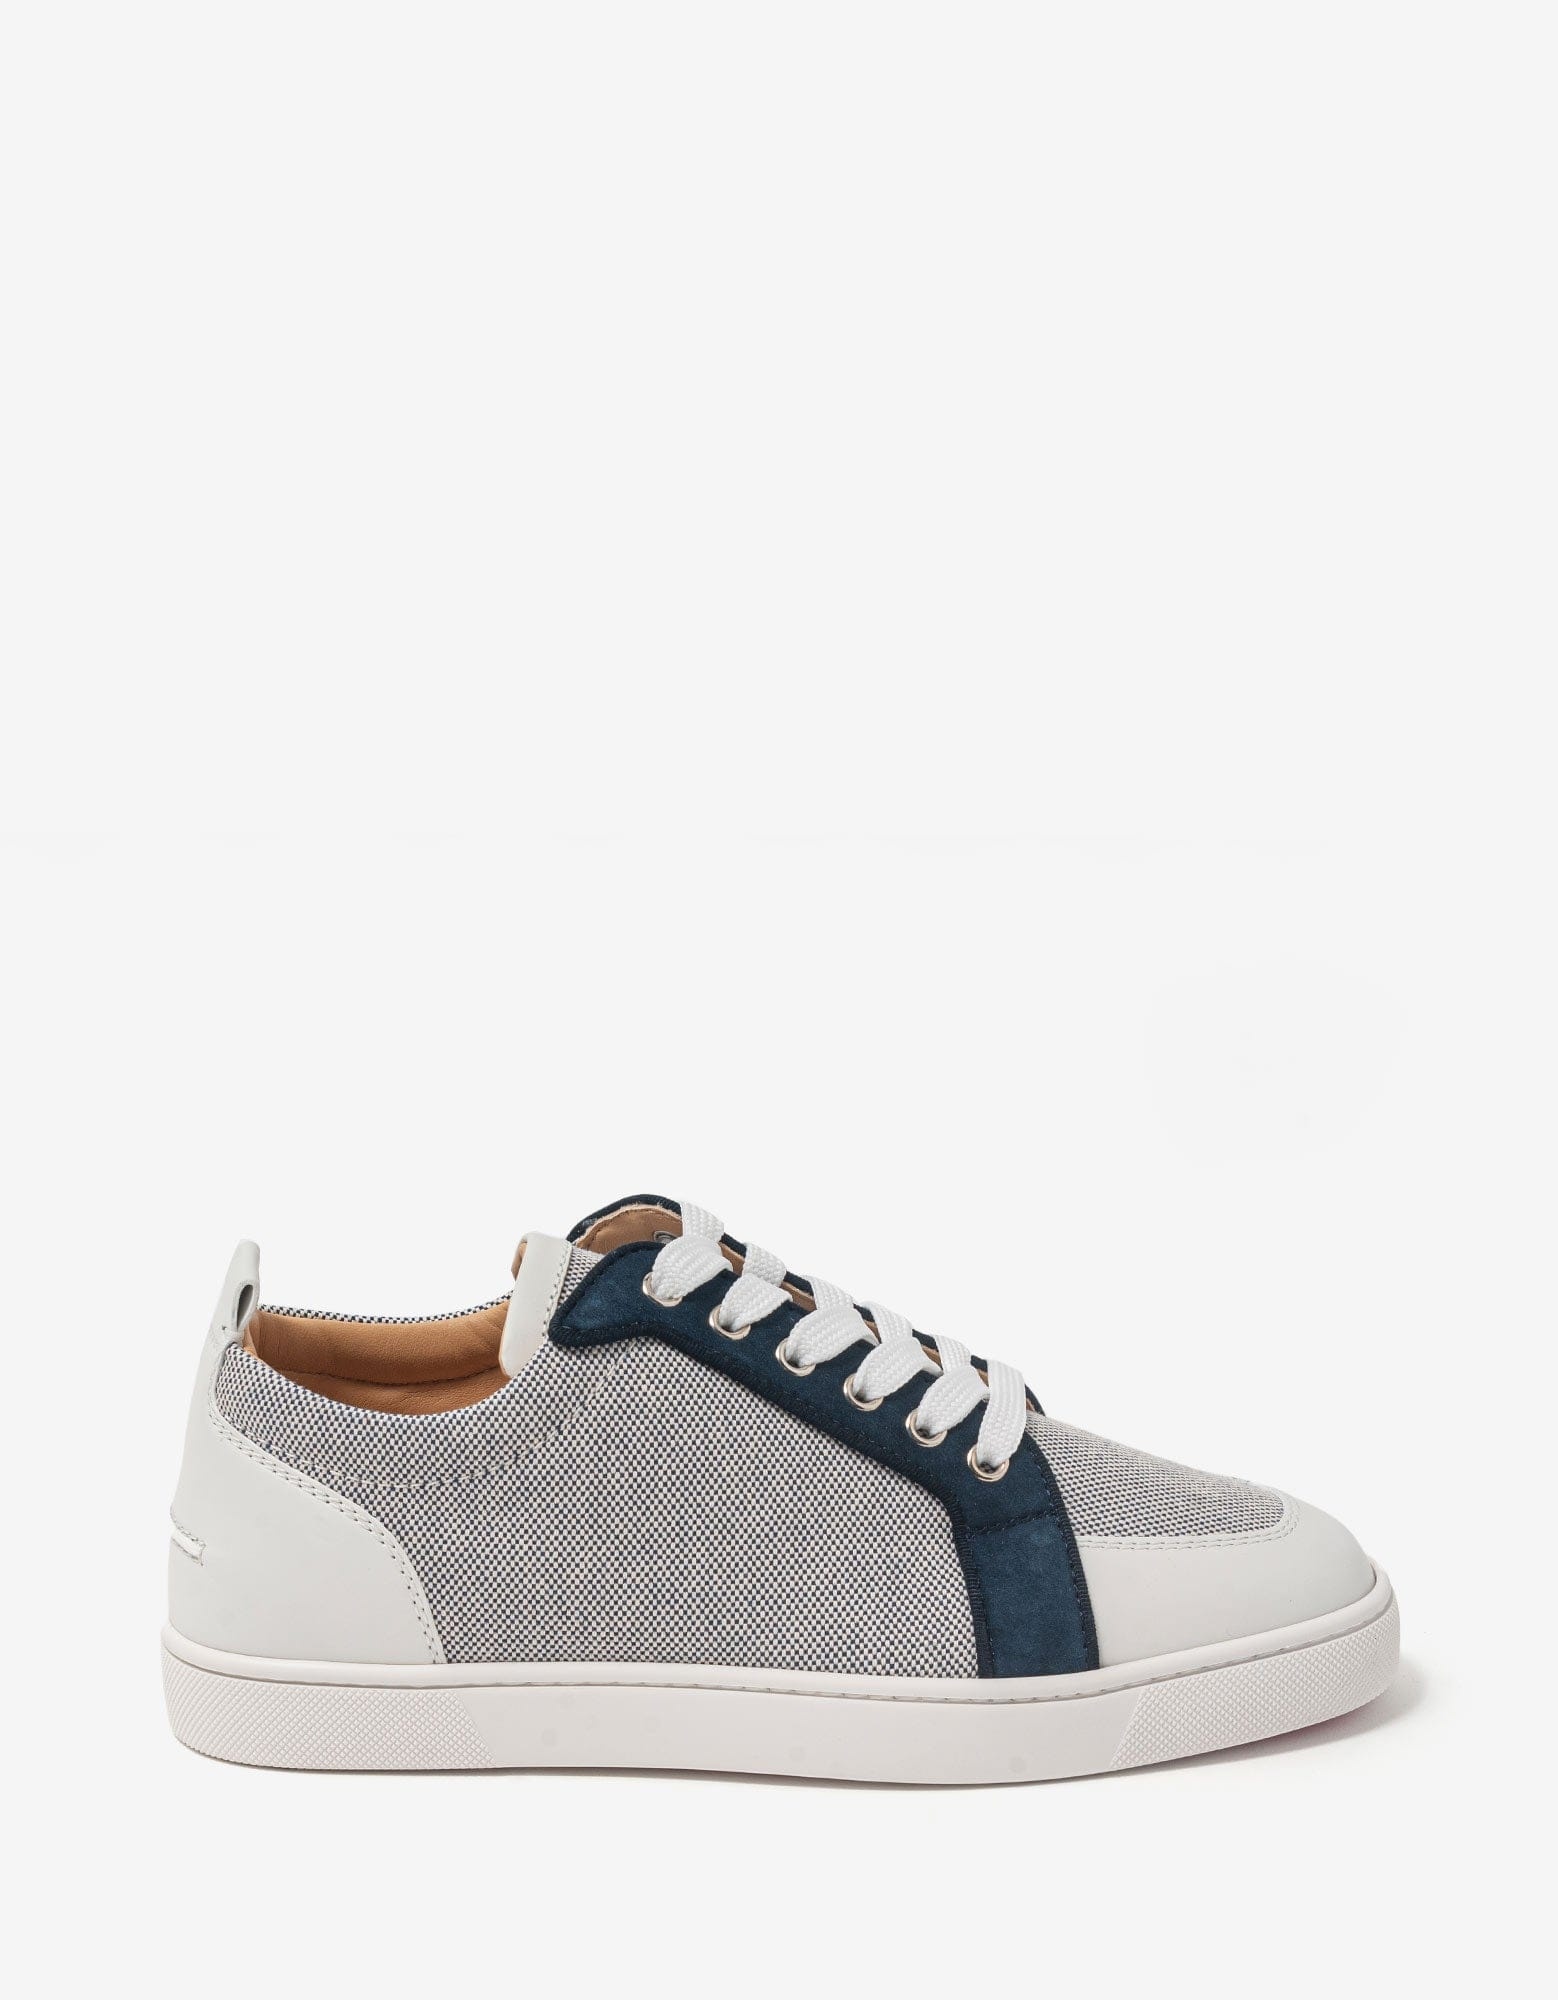 Rantulow Flat Navy Blue & White Trainers - - 2